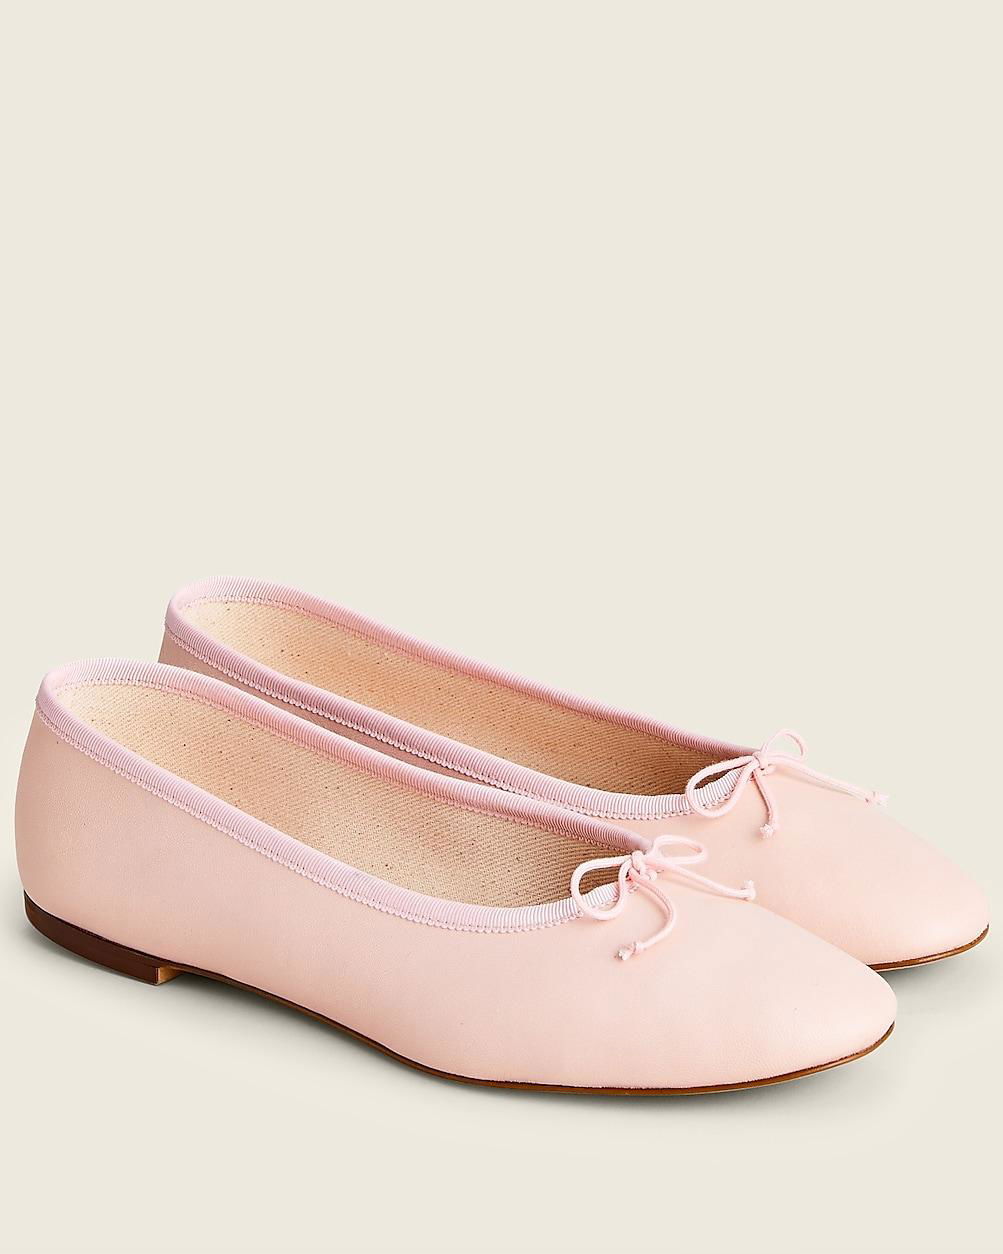 Zoe ballet flats in leather by J.CREW